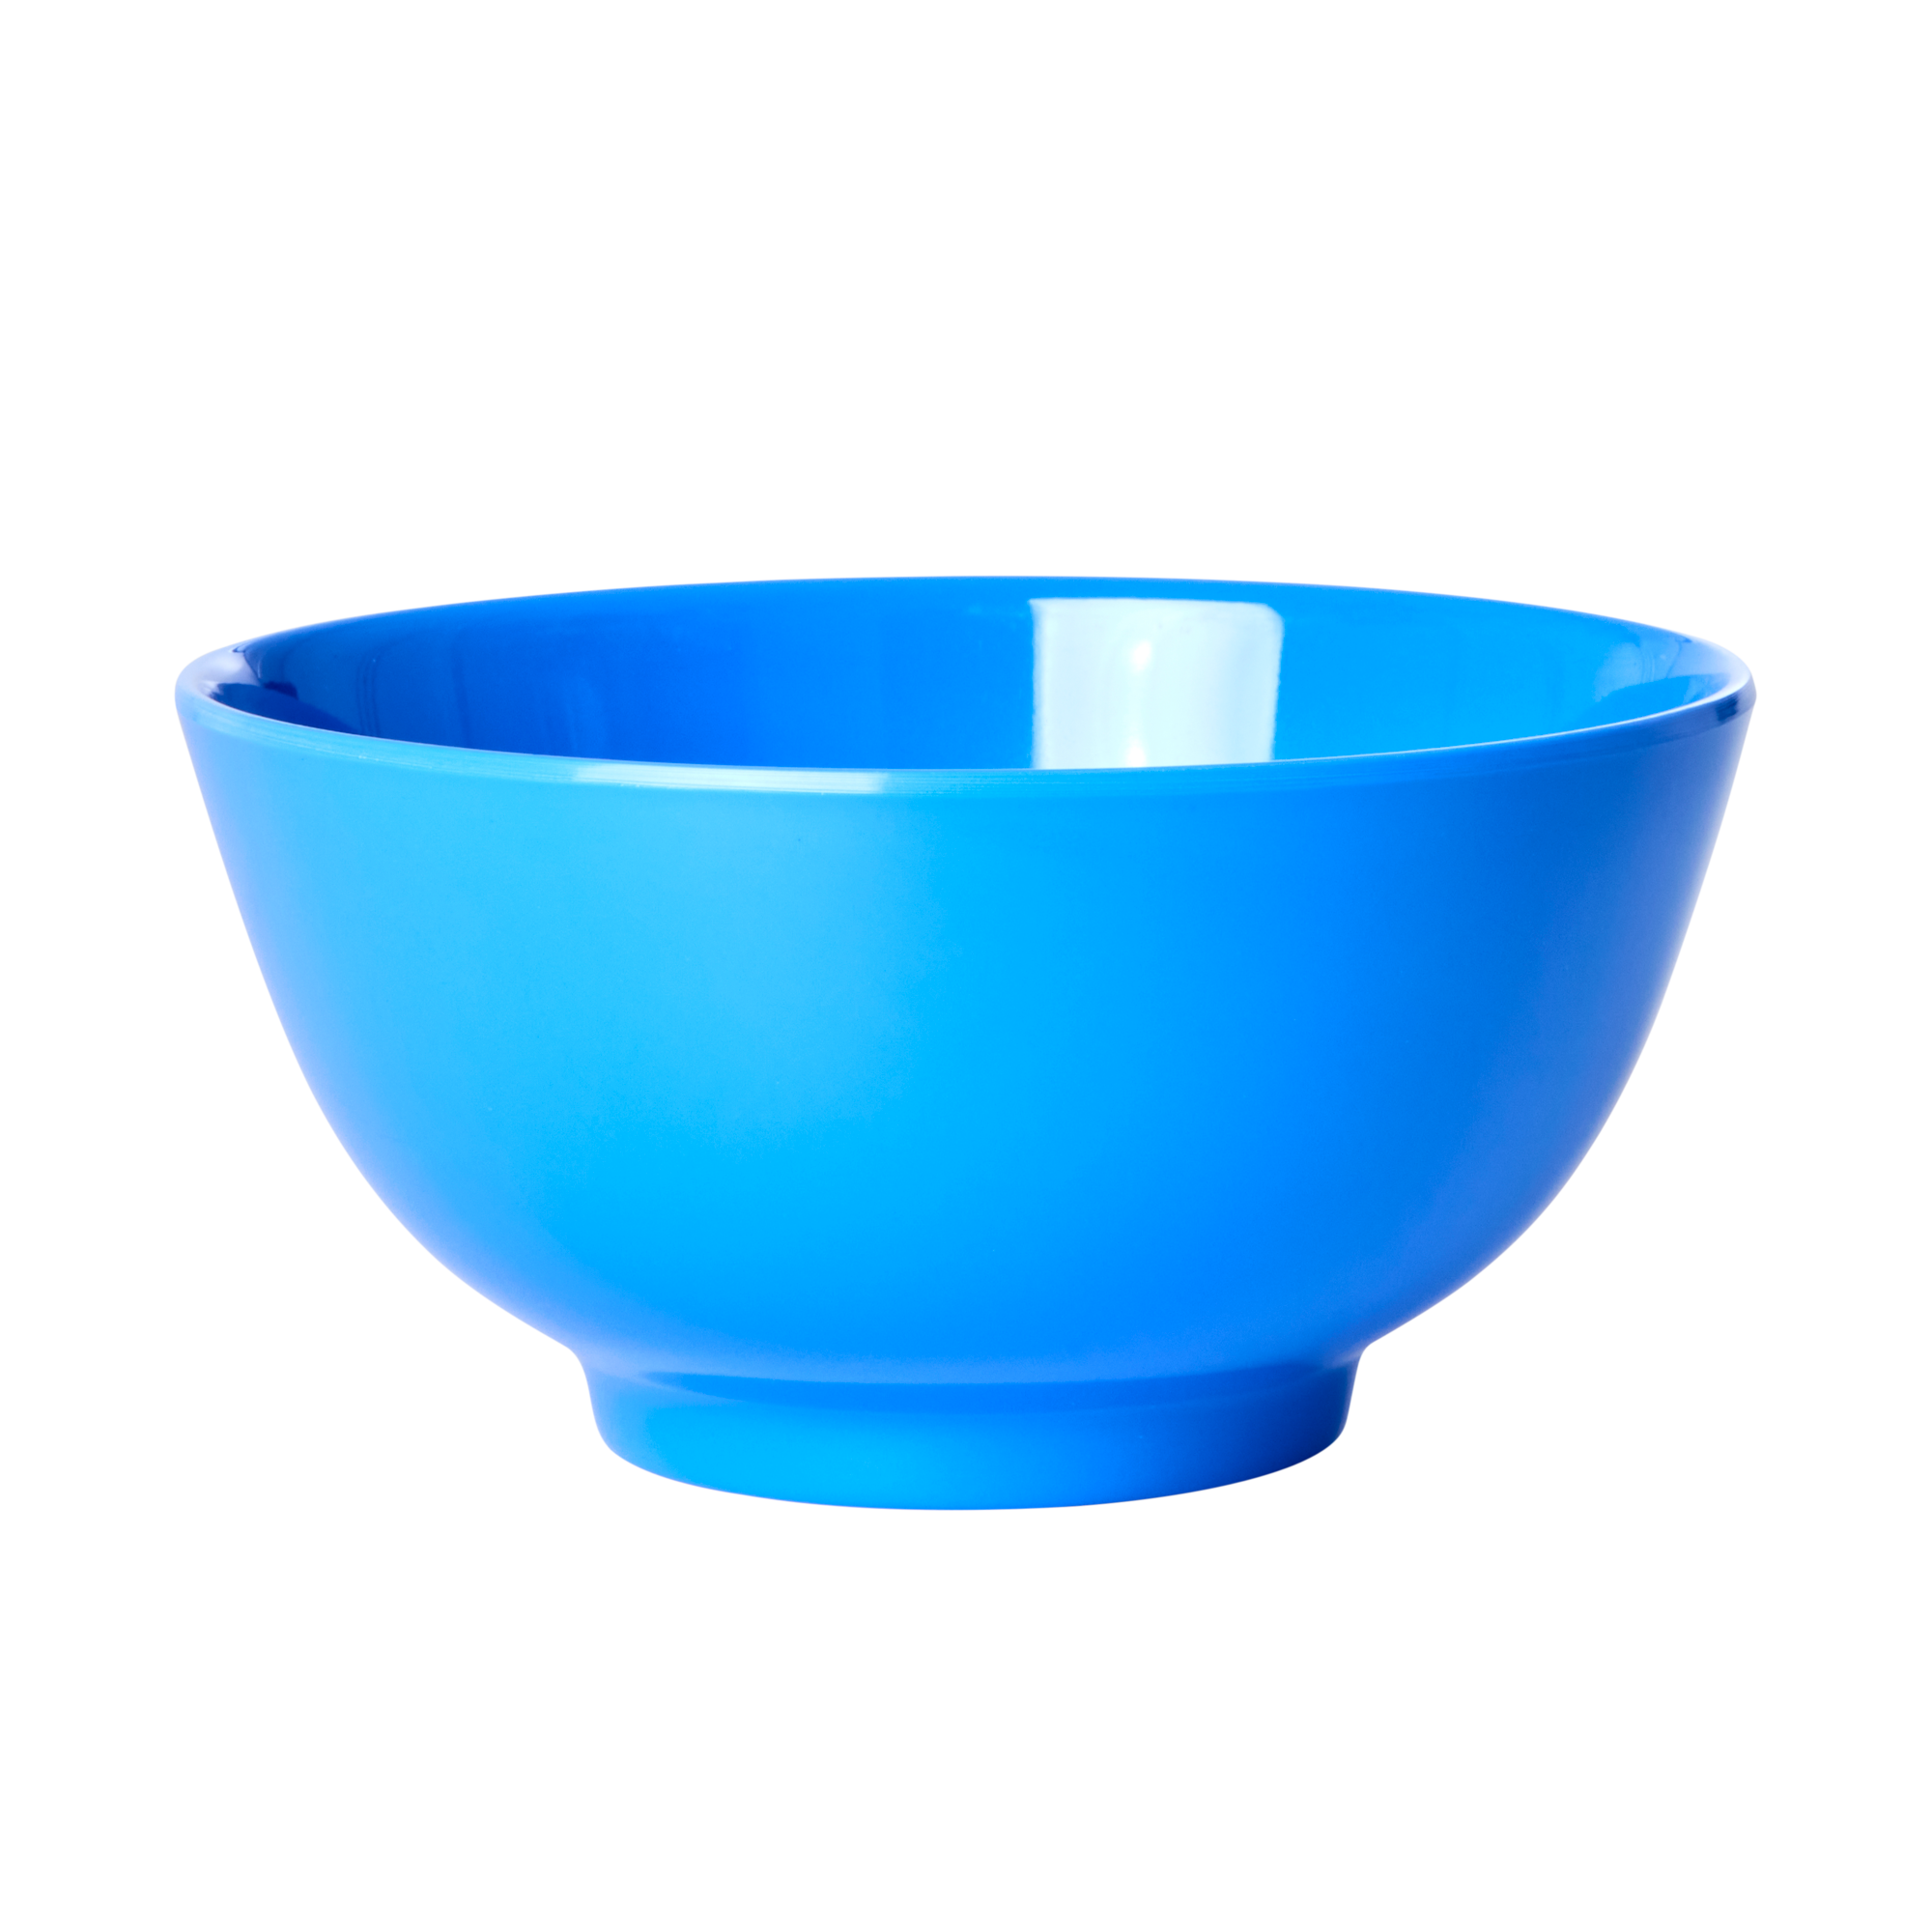 Melamine bowl by Rice by Rice in the color light blue